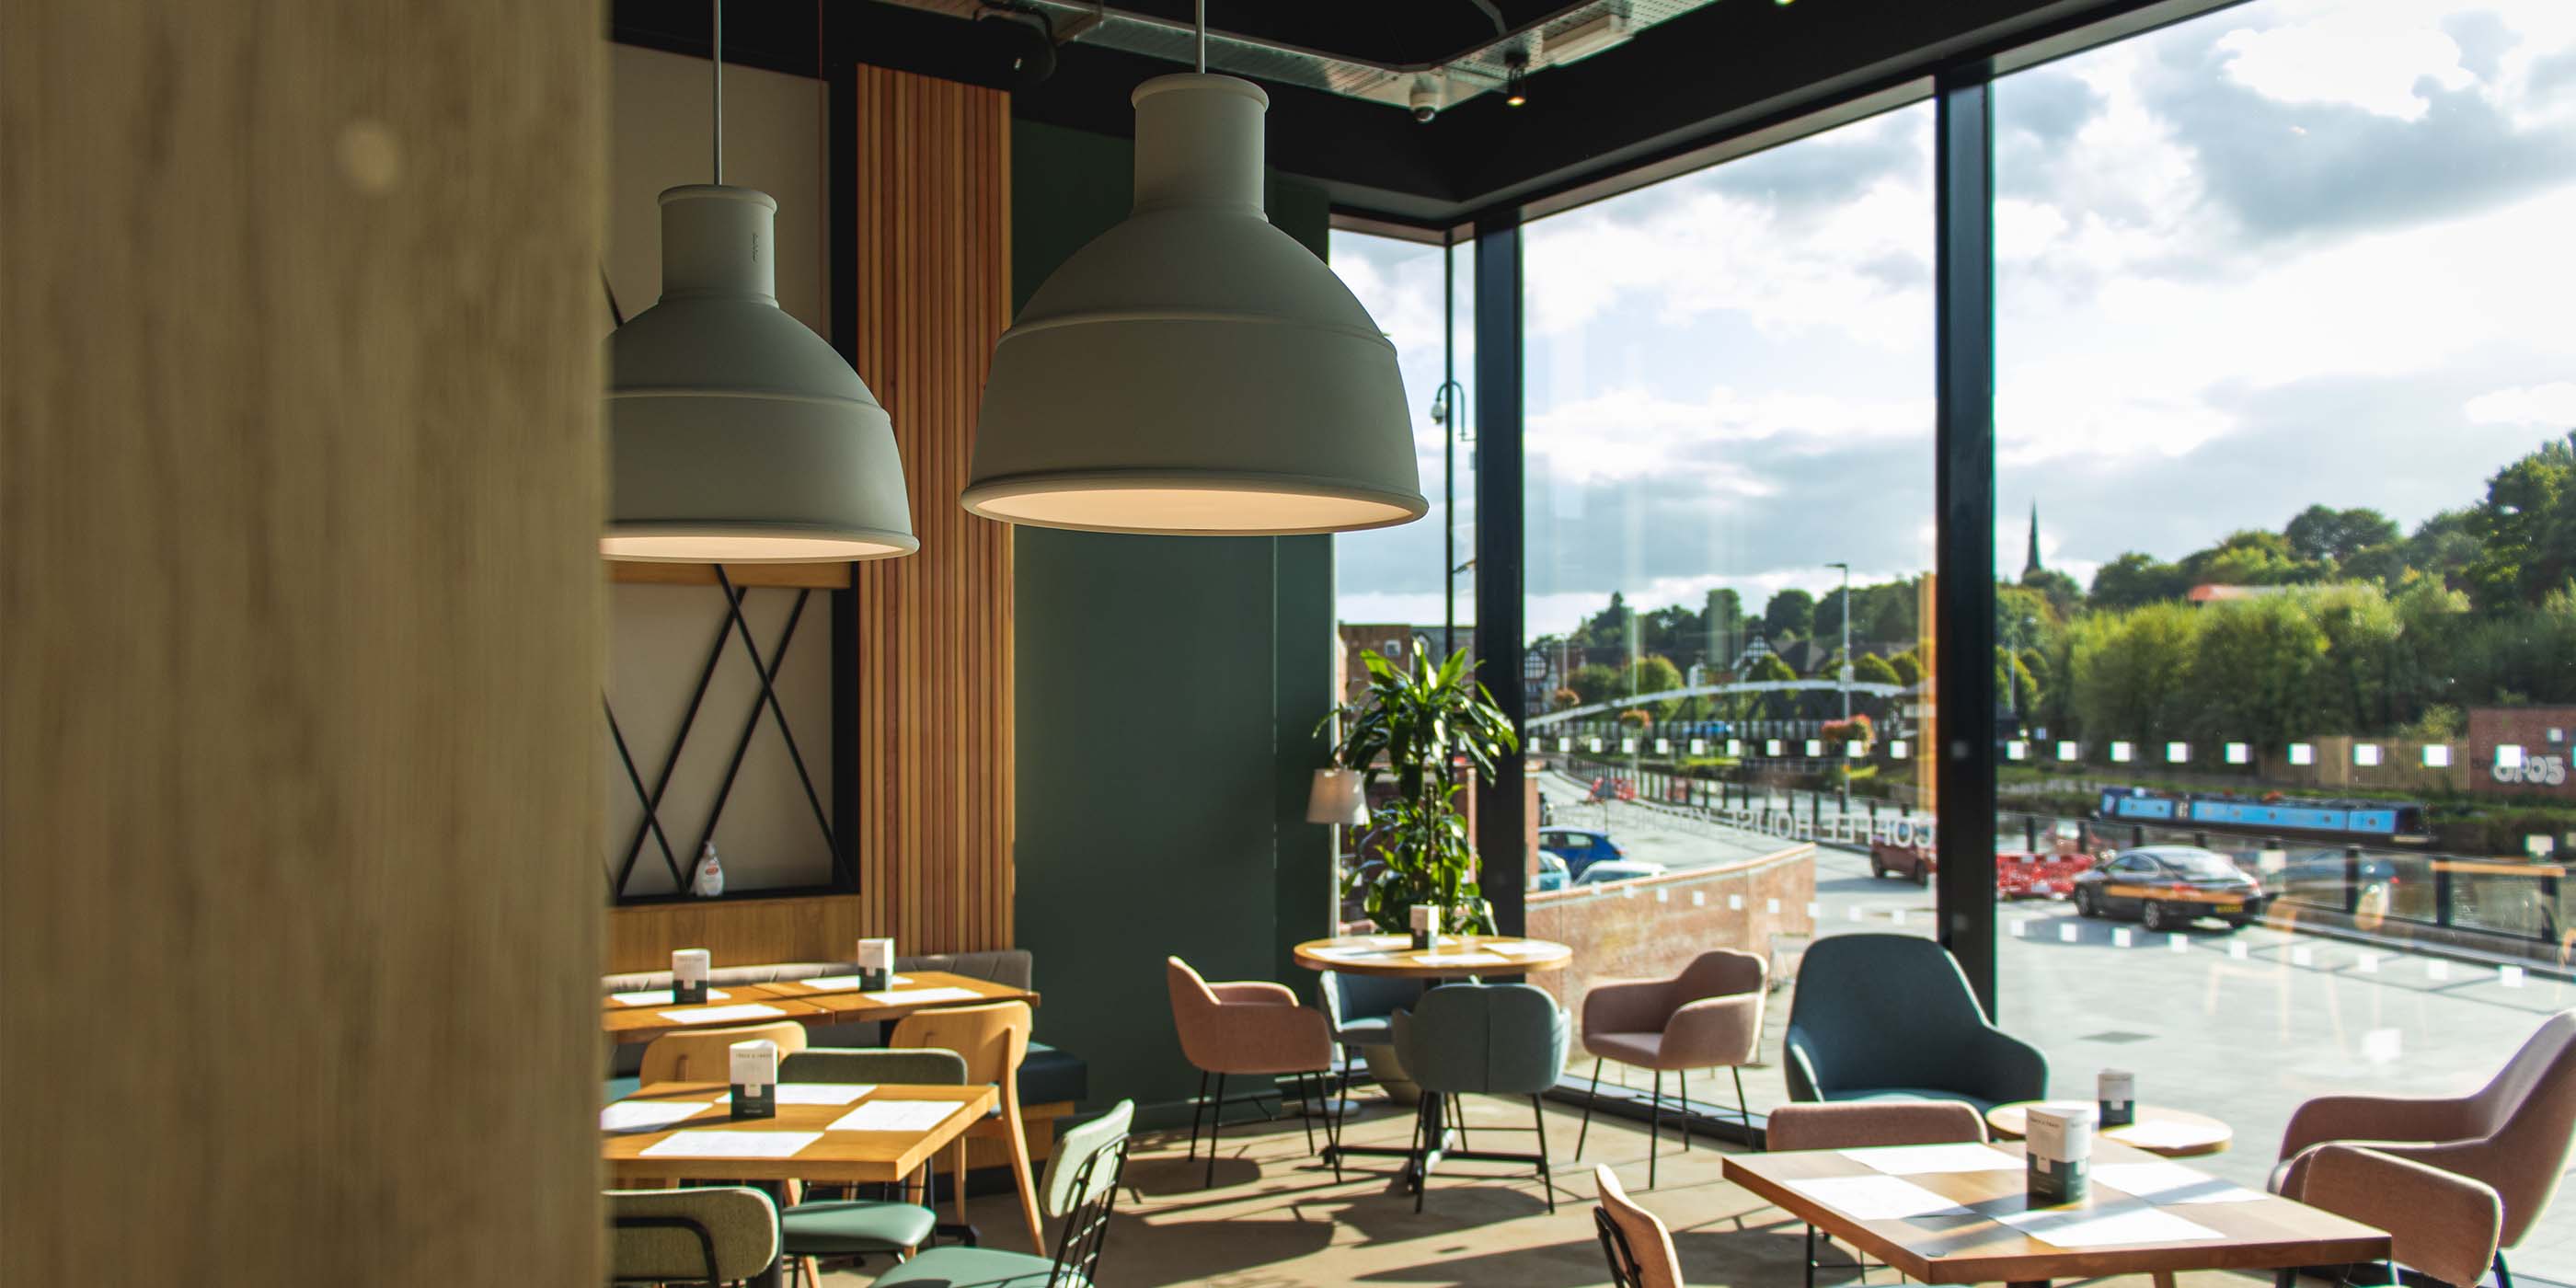 BEAR Northwich overlooking the river. Join us for brunch with a view!